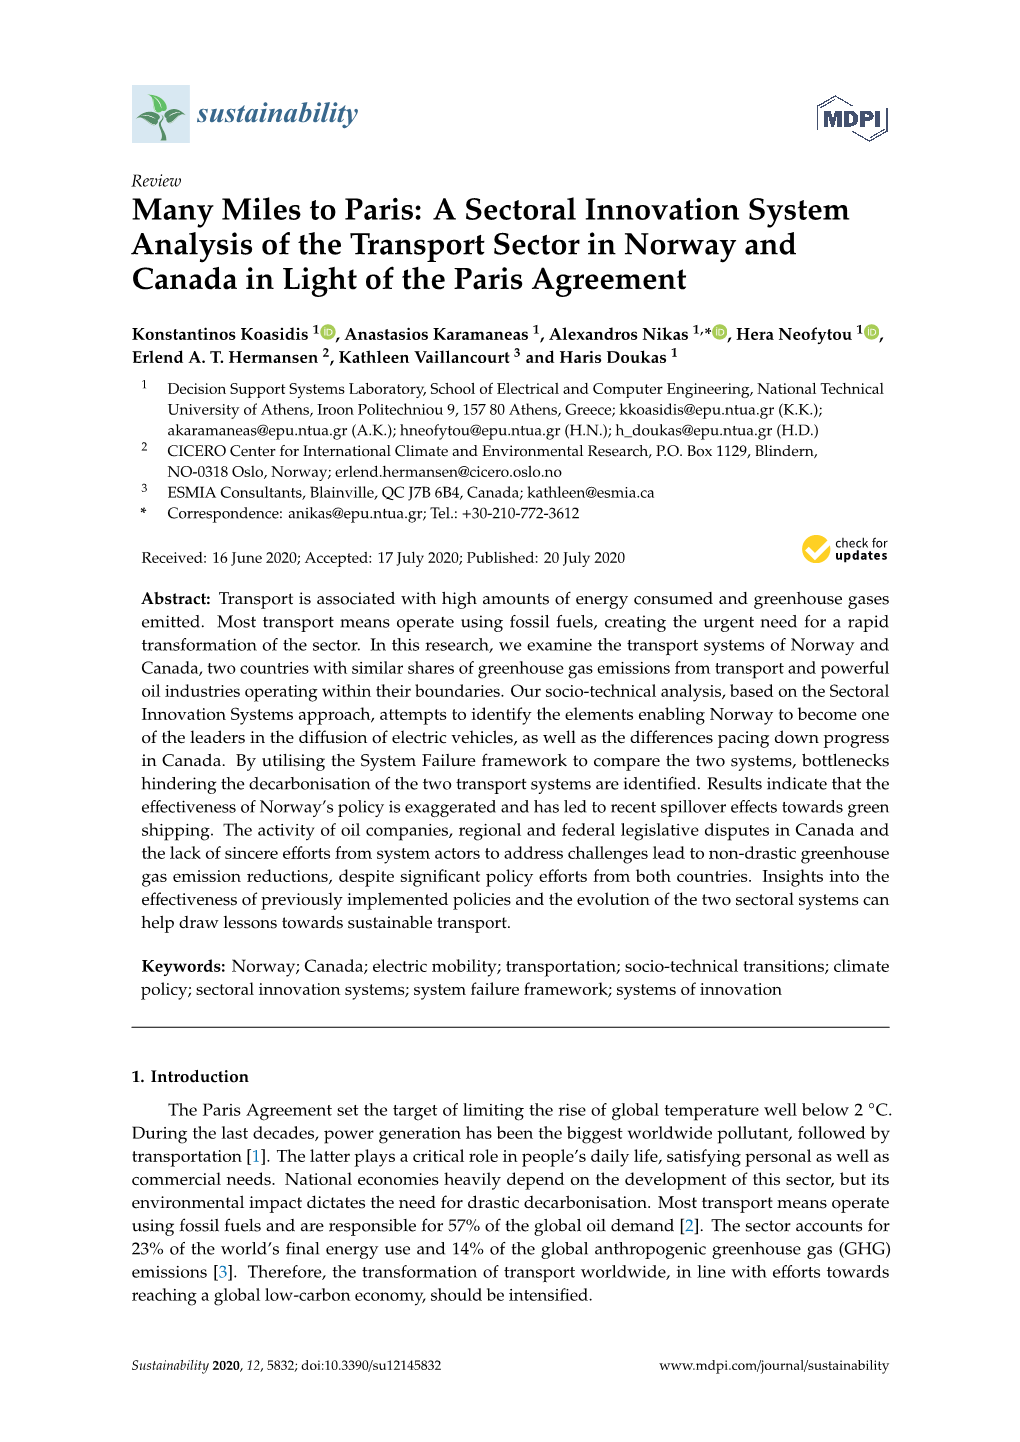 A Sectoral Innovation System Analysis of the Transport Sector in Norway and Canada in Light of the Paris Agreement